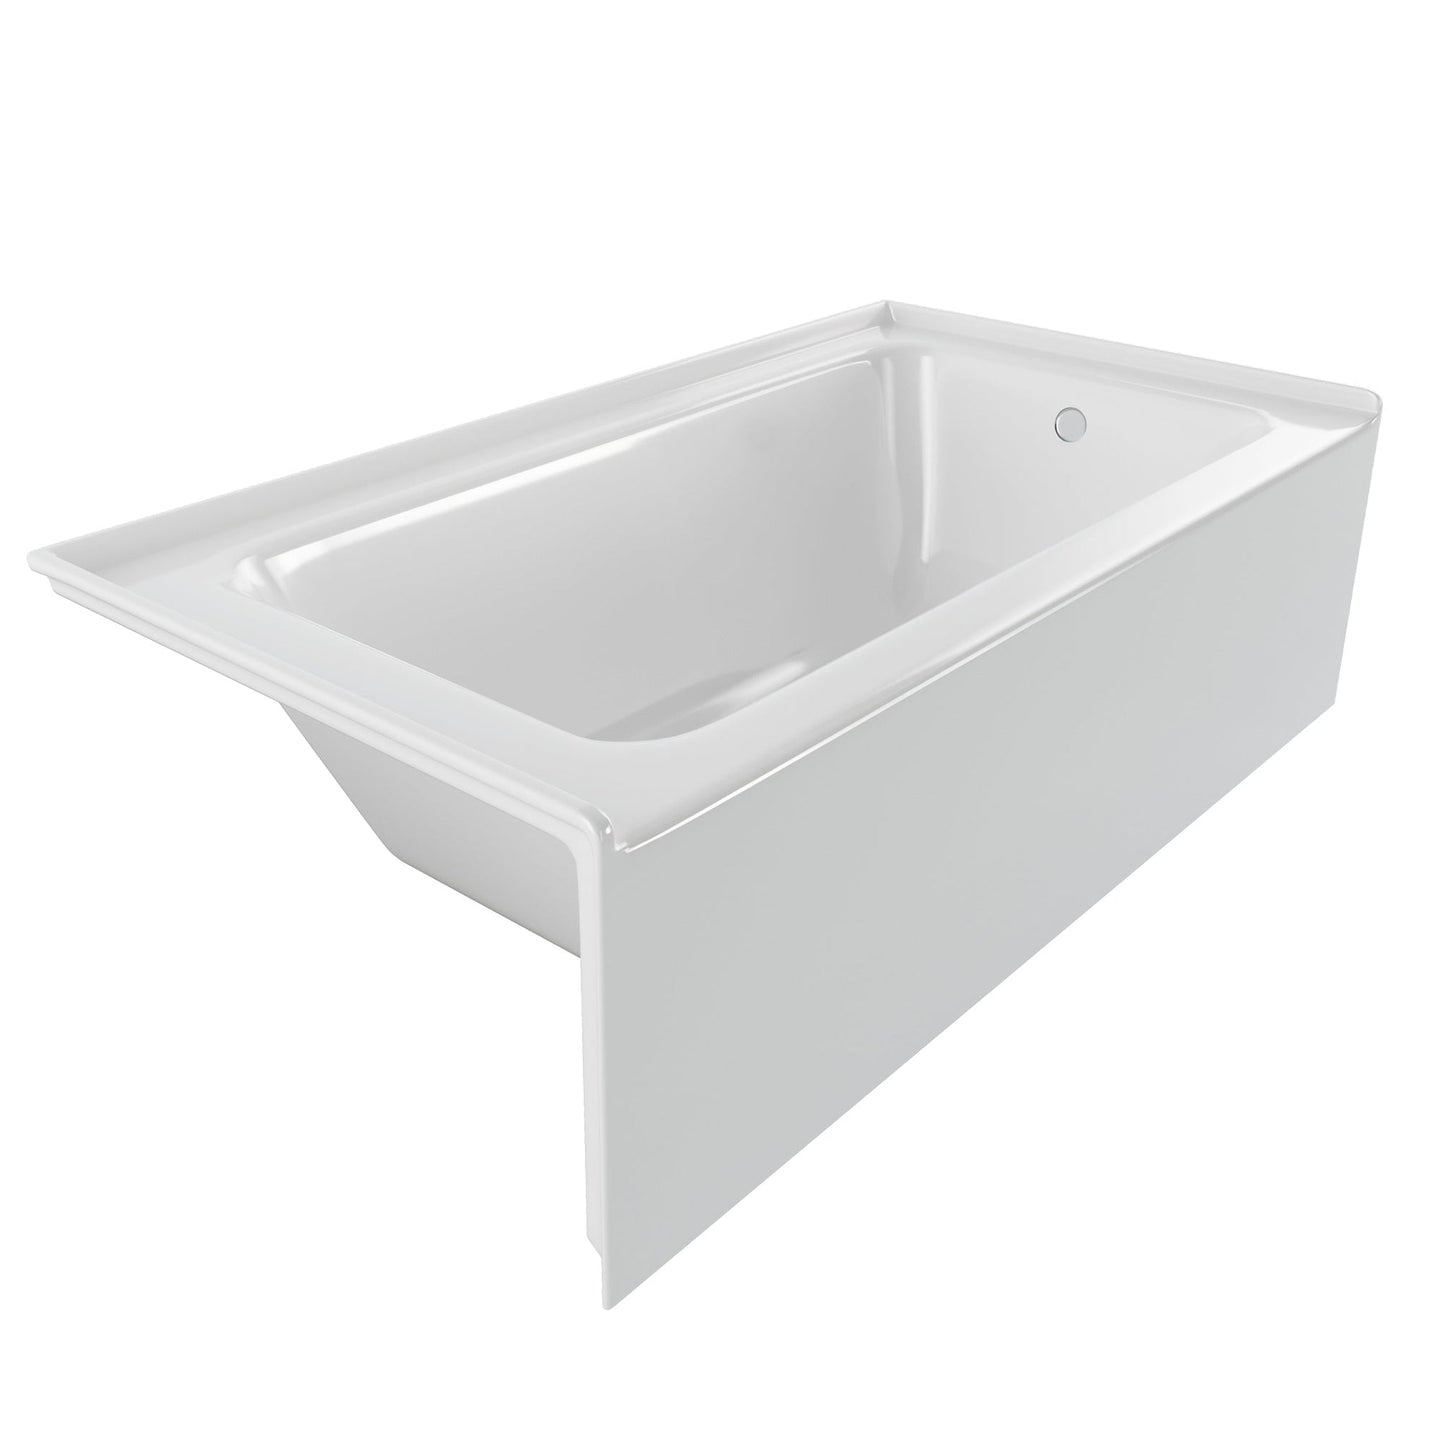 PULSE ShowerSpas 60" W x 32" D Rectangular Glossy White Acrylic Right Drain Placement Alcove Tub